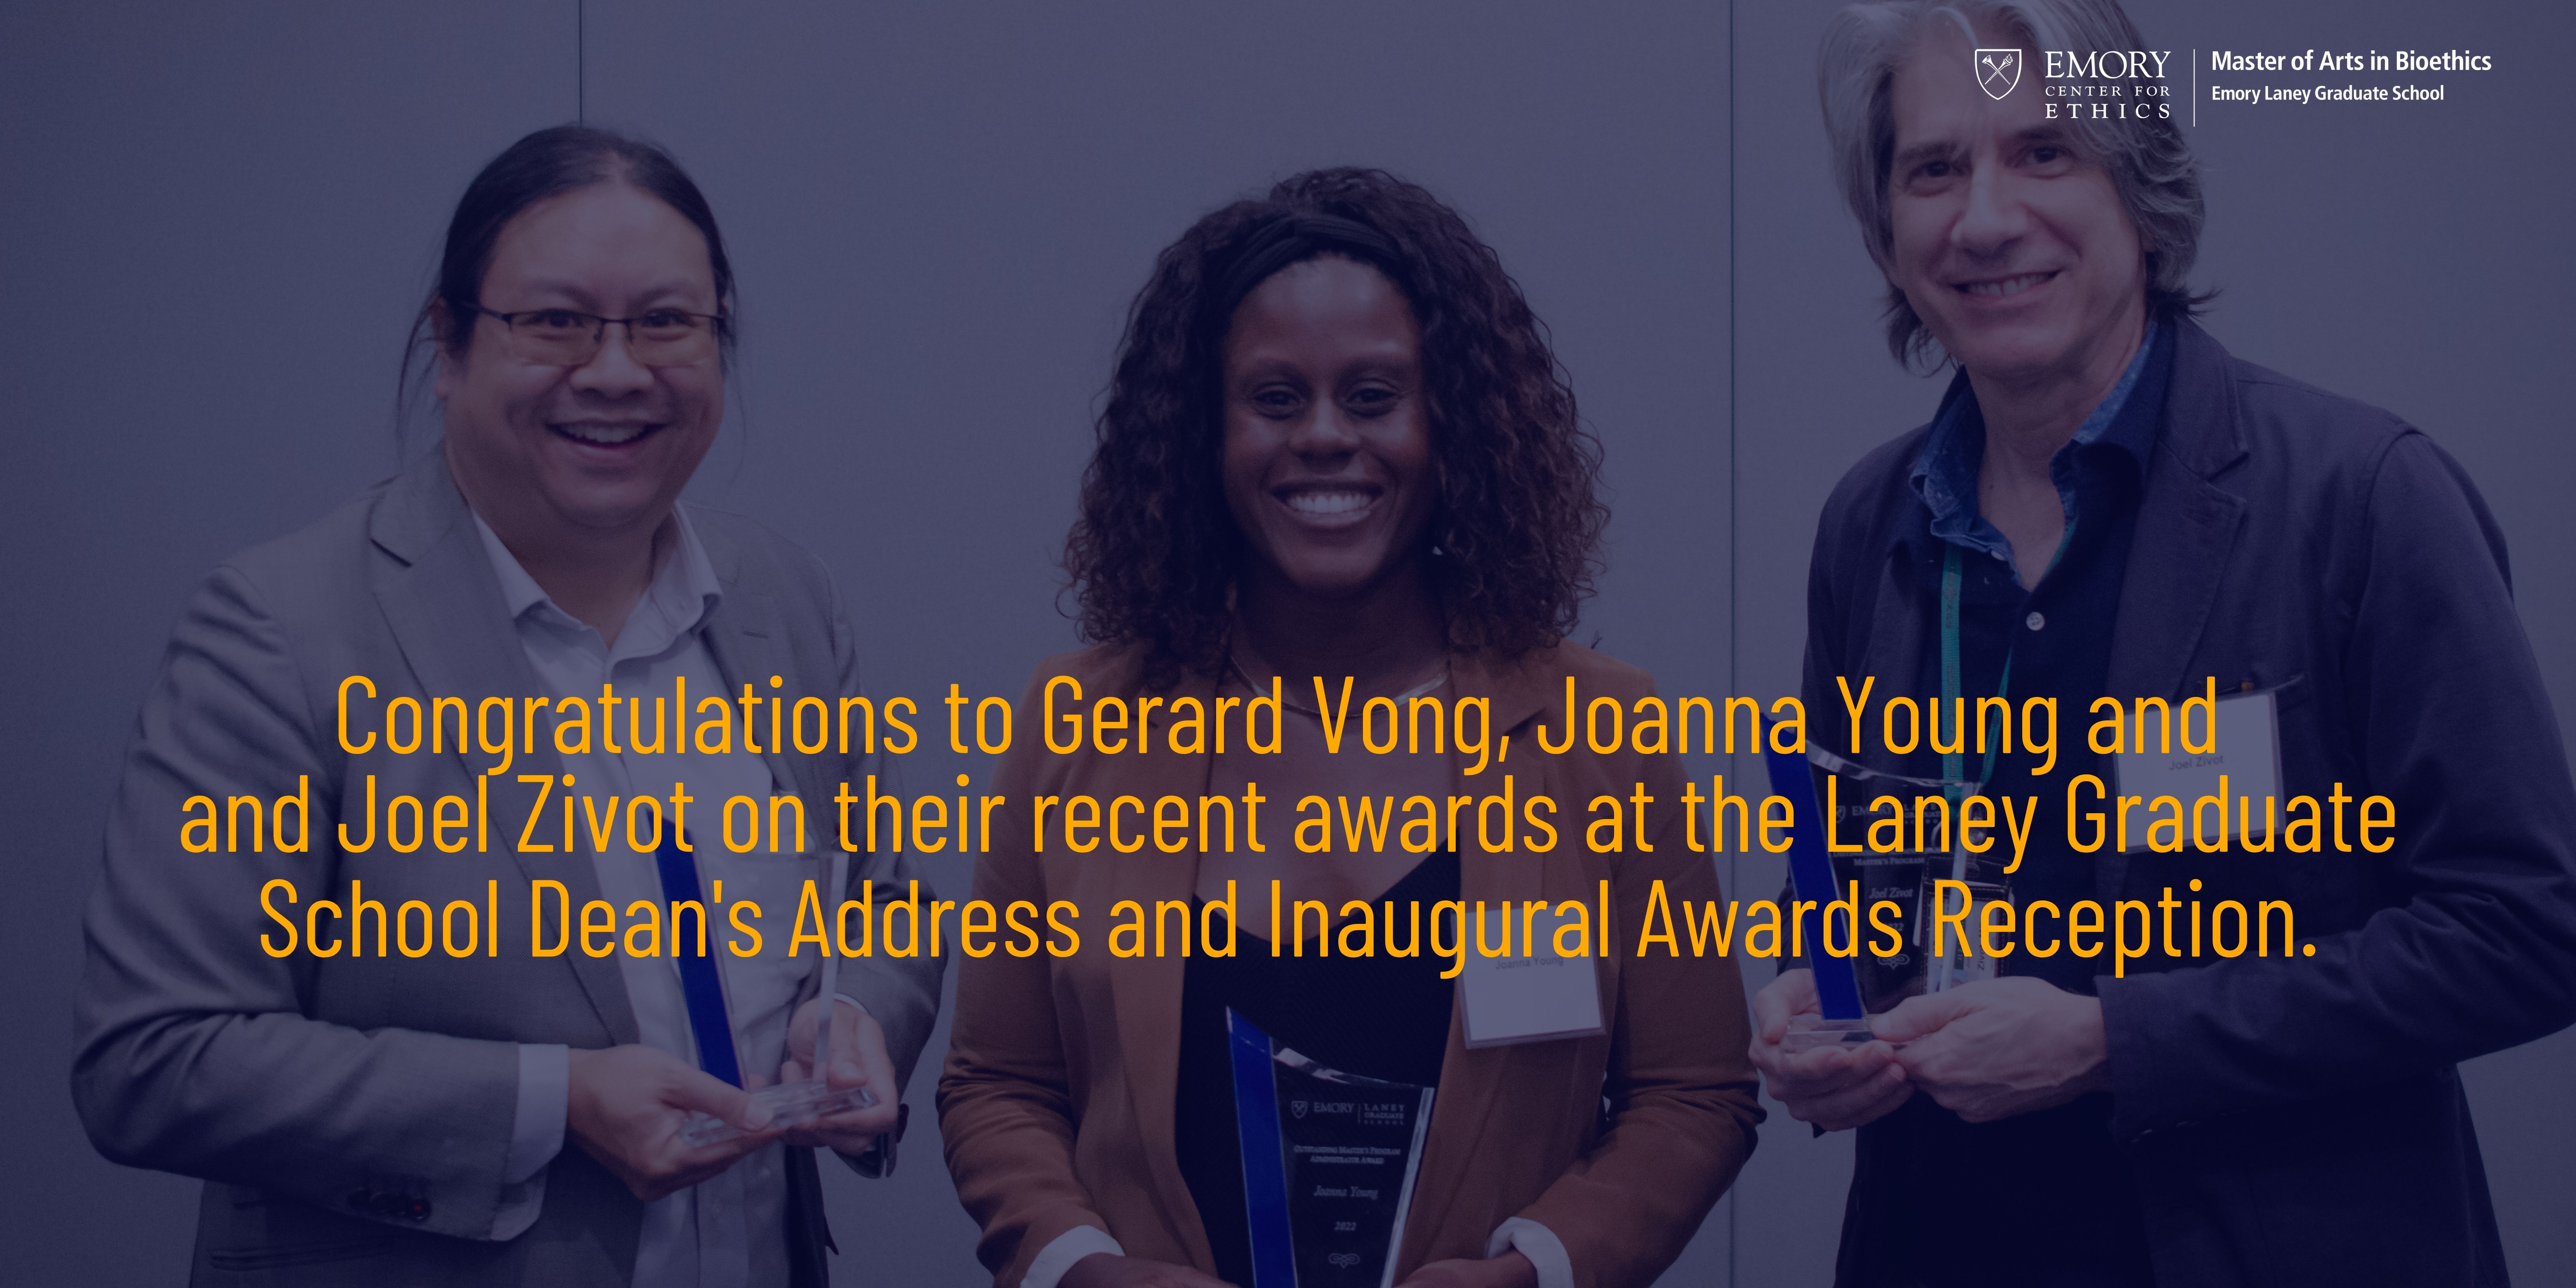 The Emory Center for Ethics is proud to announce that our Master of Arts in Bioethics (MAB) program was well represented at the Laney Graduate School (LGS) Dean’s Address and Inaugural Awards Reception. 